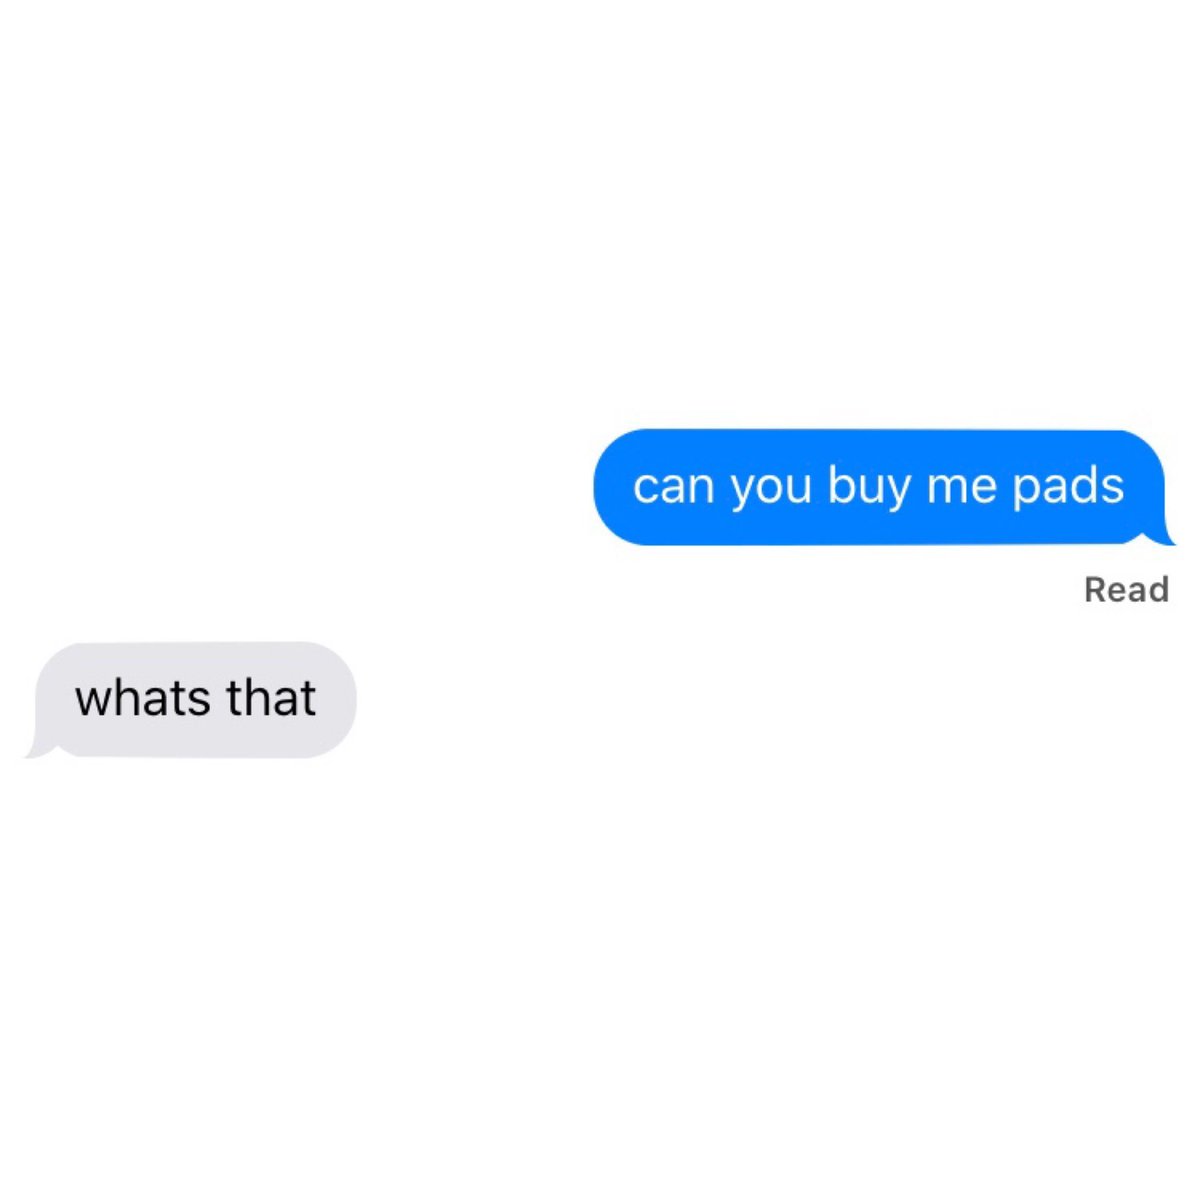 nct 127 responding to “can you buy me pads” — a thread